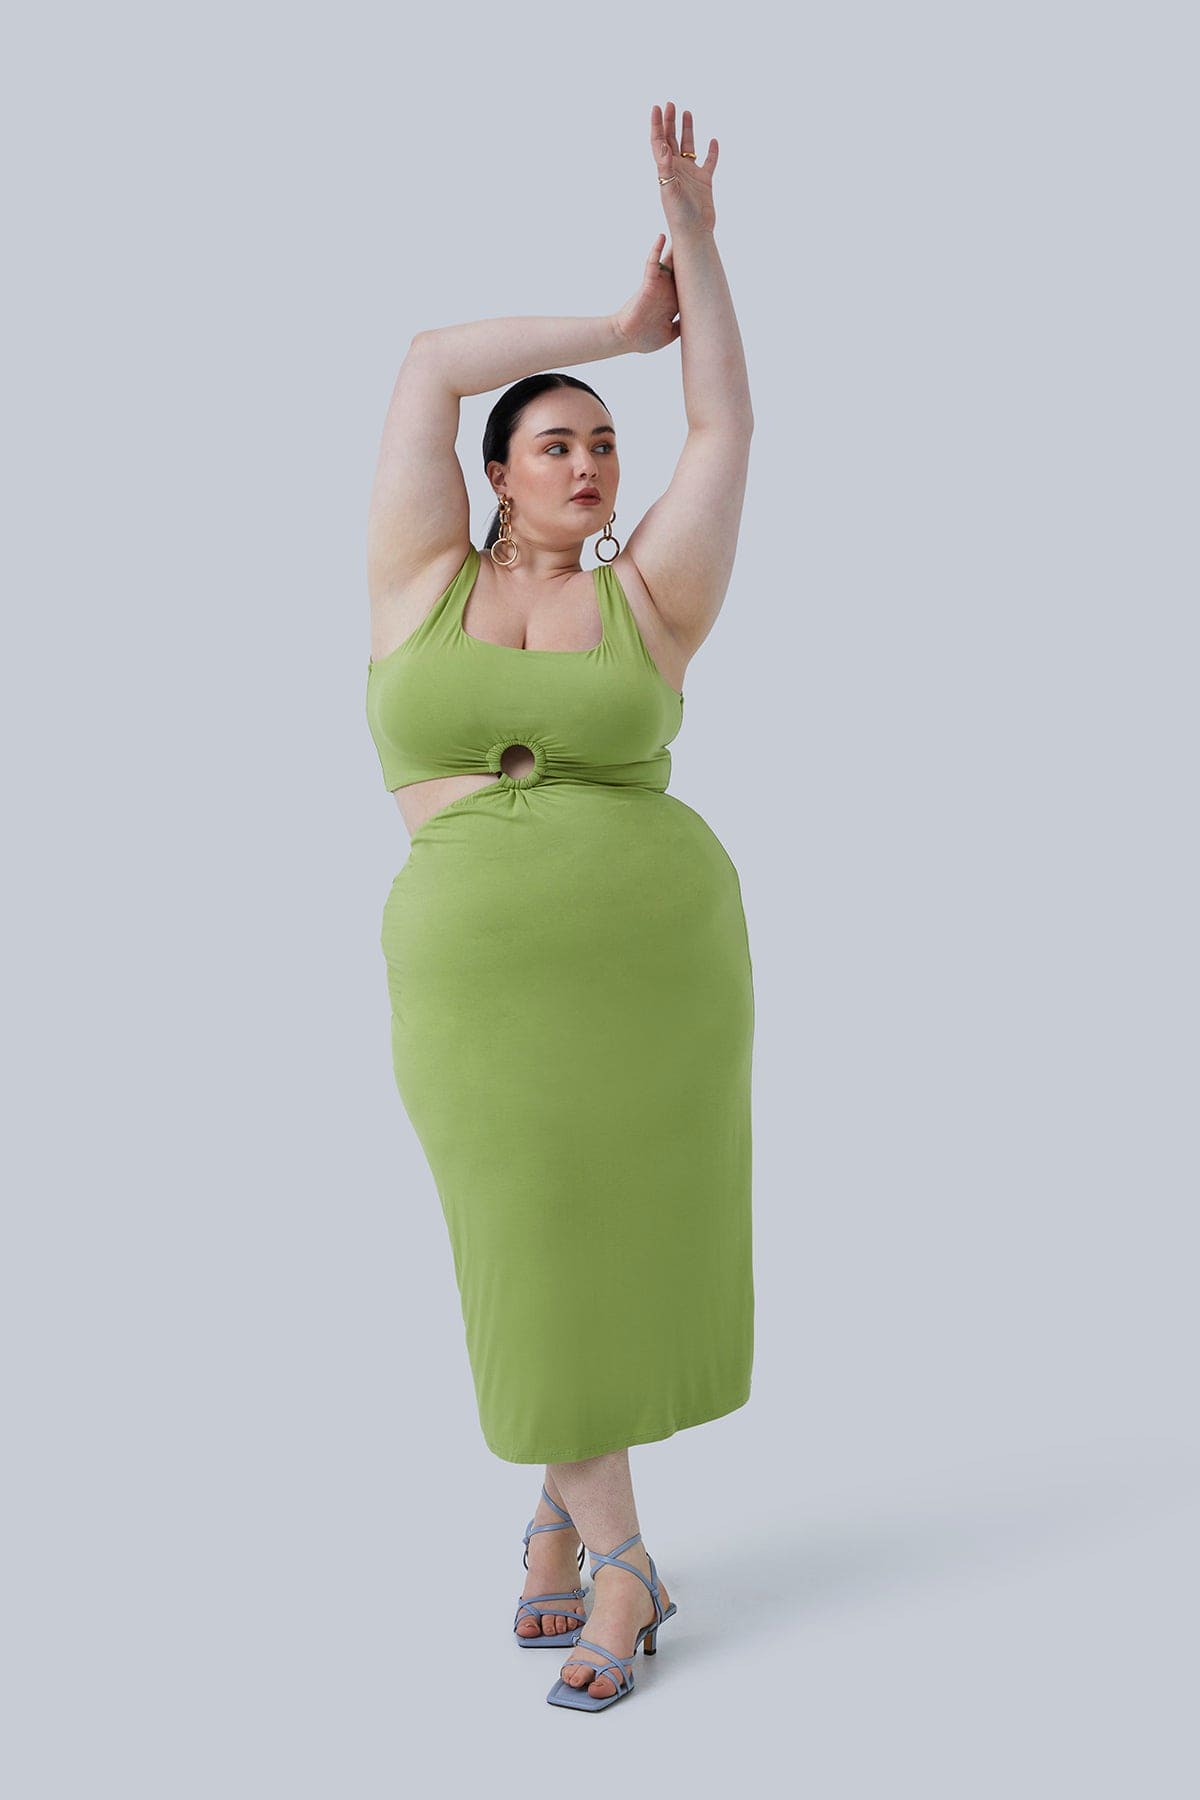 Plus size boutique model with arms reaching up in the air showing the full look of the Gigi Midi Dress size 2X by Gia IRL. Dress is paired with light blue strappy, low heels and simple gold jewelry.